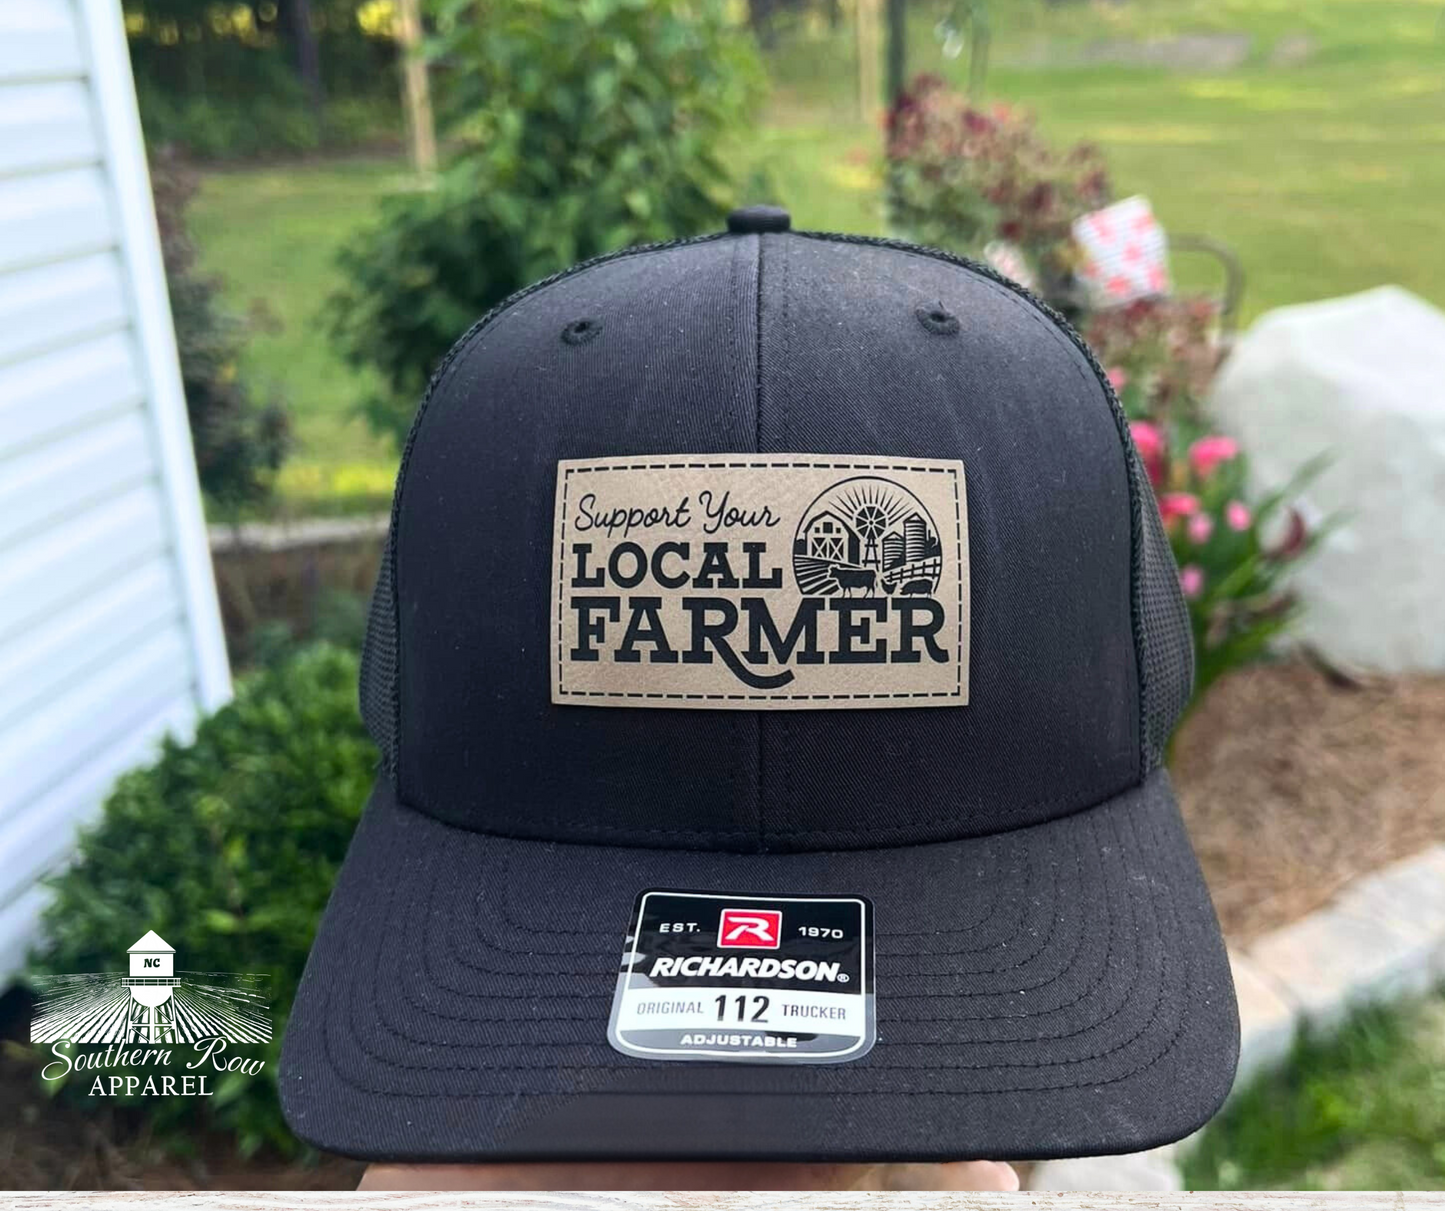 The Support Your Local Farmer Hat